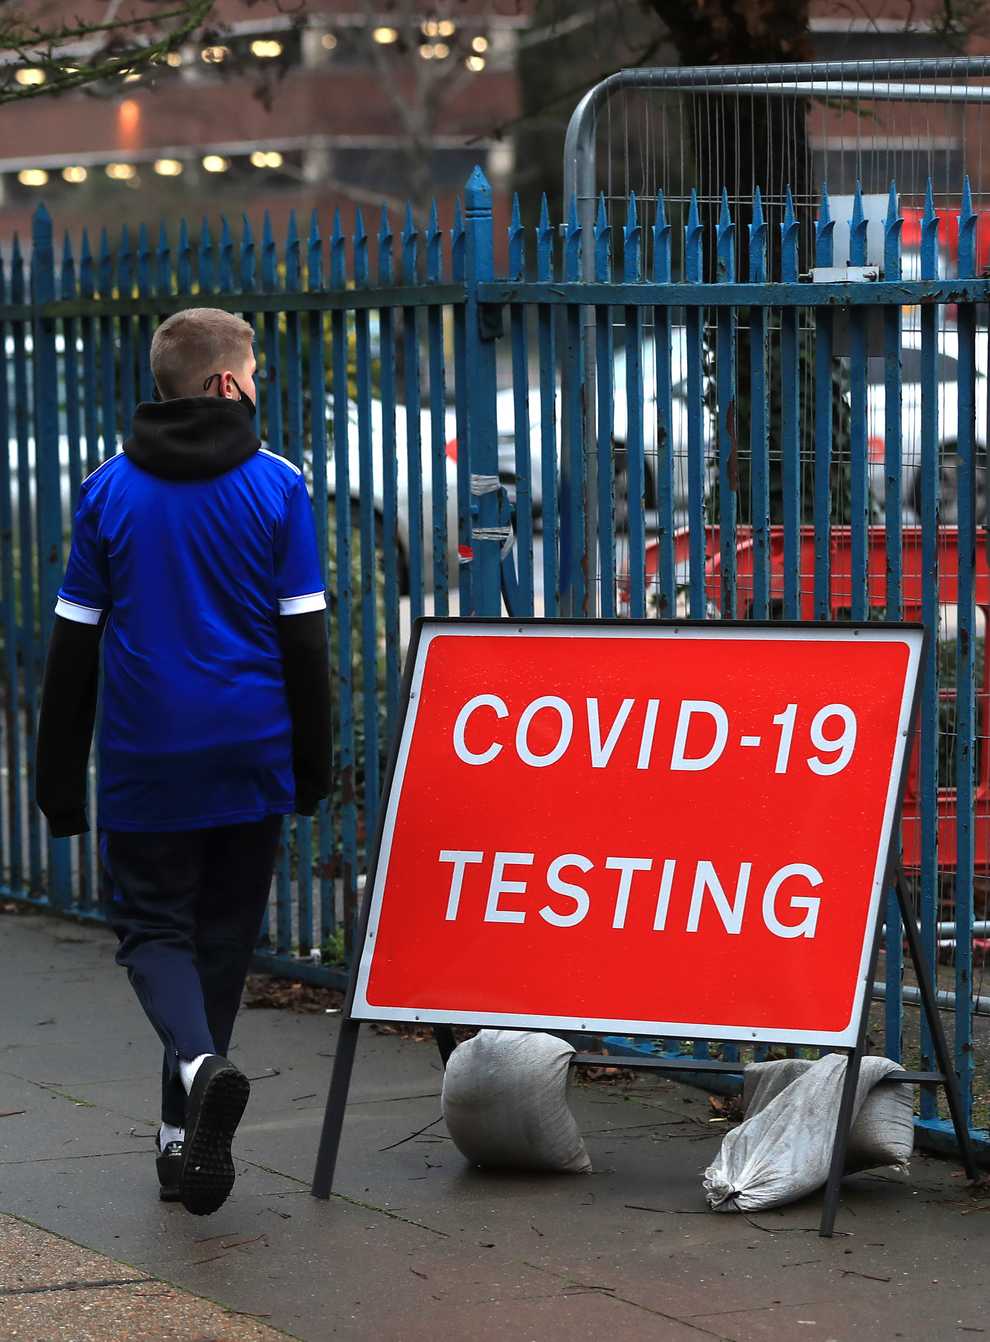 People walk past a Covid-19 testing sign